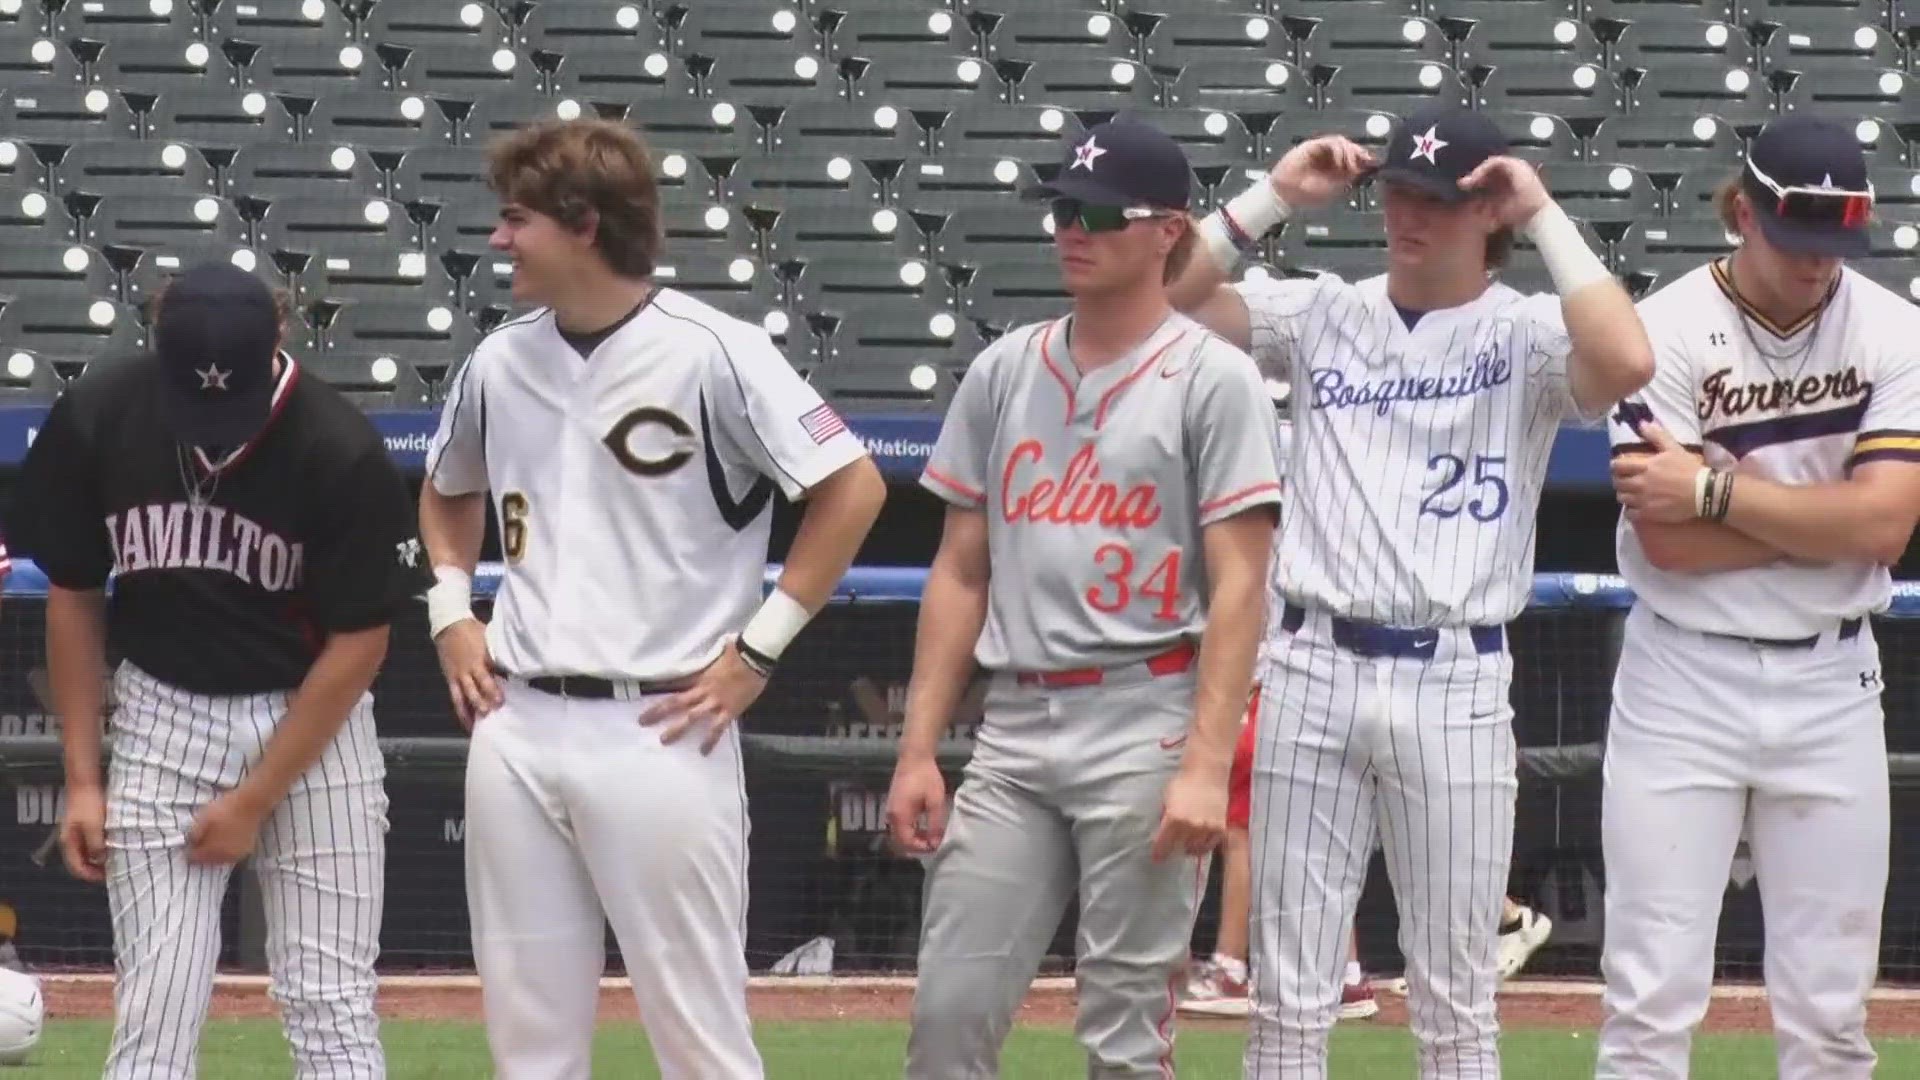 On June 17, Crawford, Bosqueville and china spring were all represented at the 2A-4A all-star game at Dell Diamond.